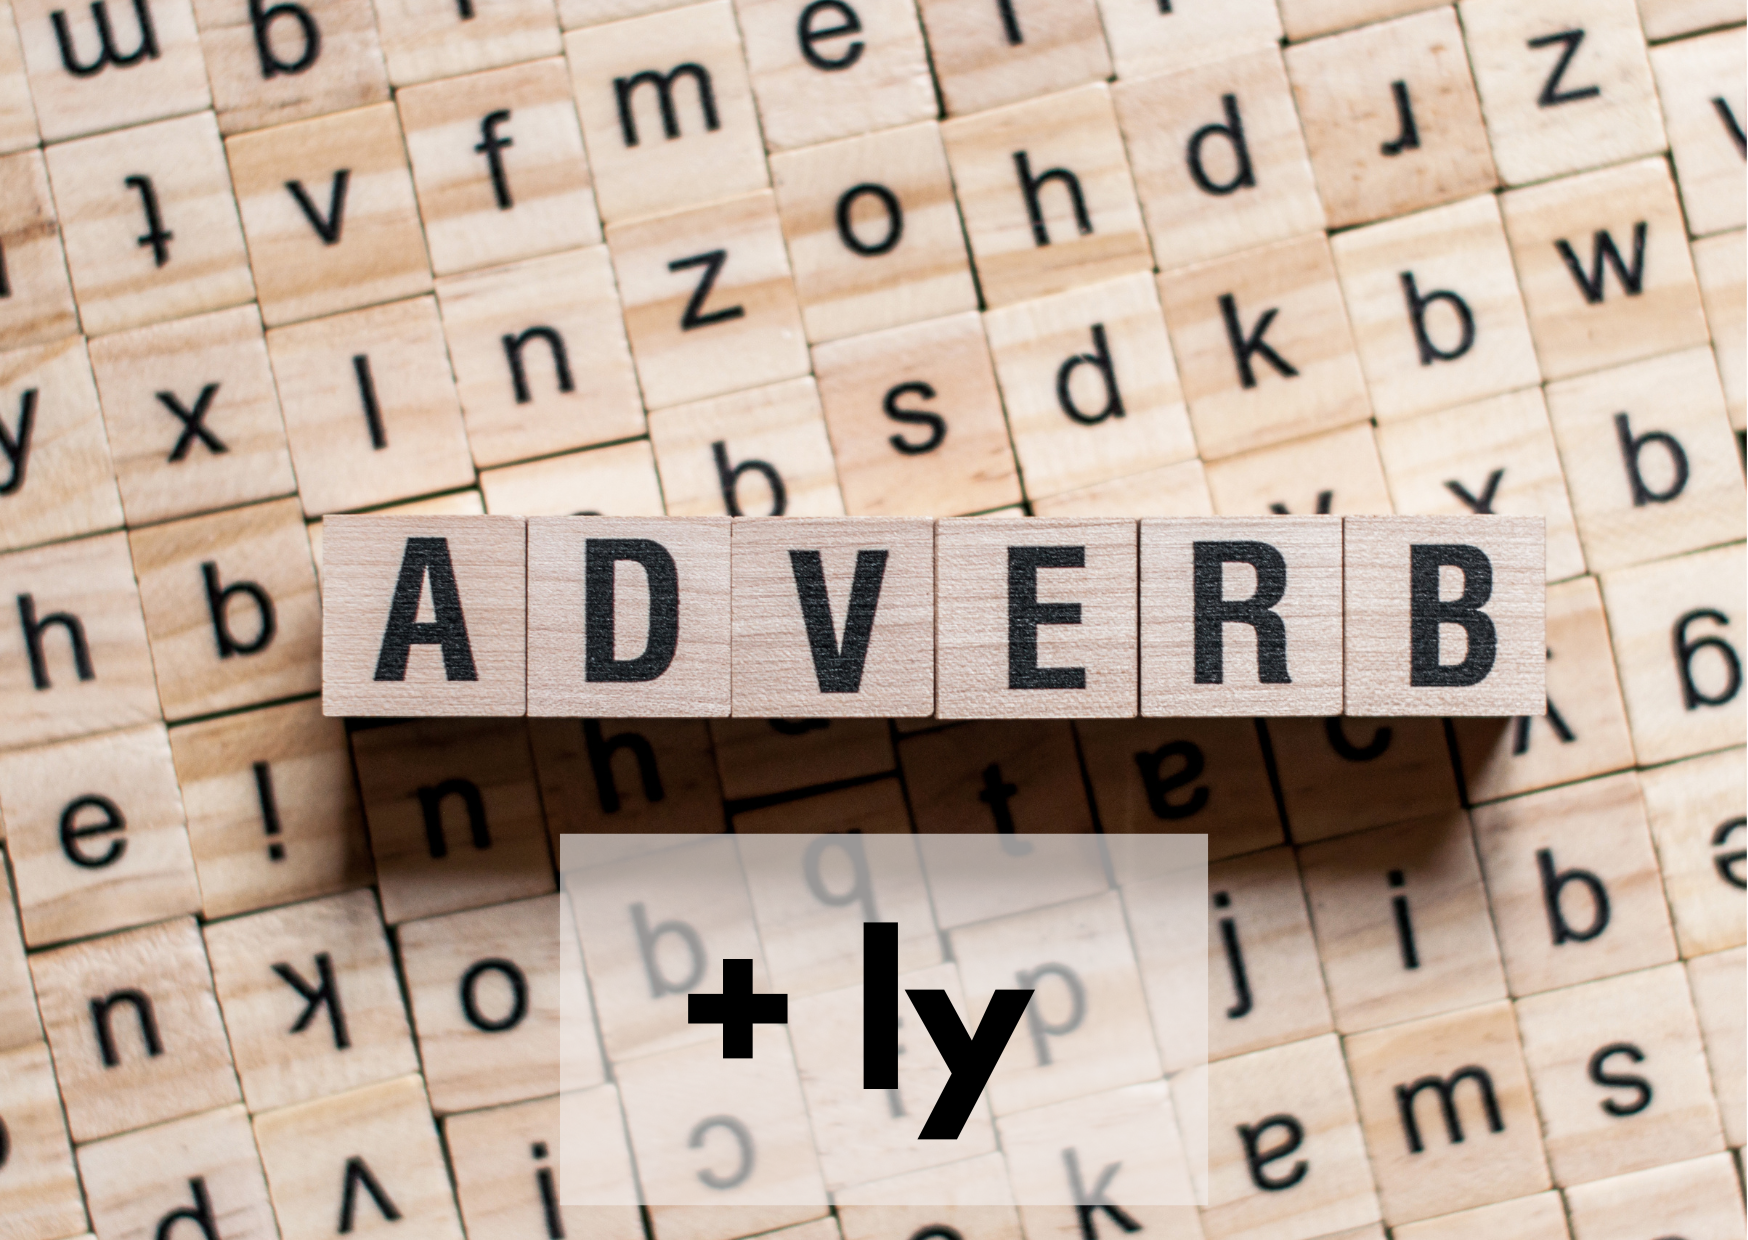 A background of wooden blocks with letters. The blocks in the front spell the word ADVERBS with + ly right below